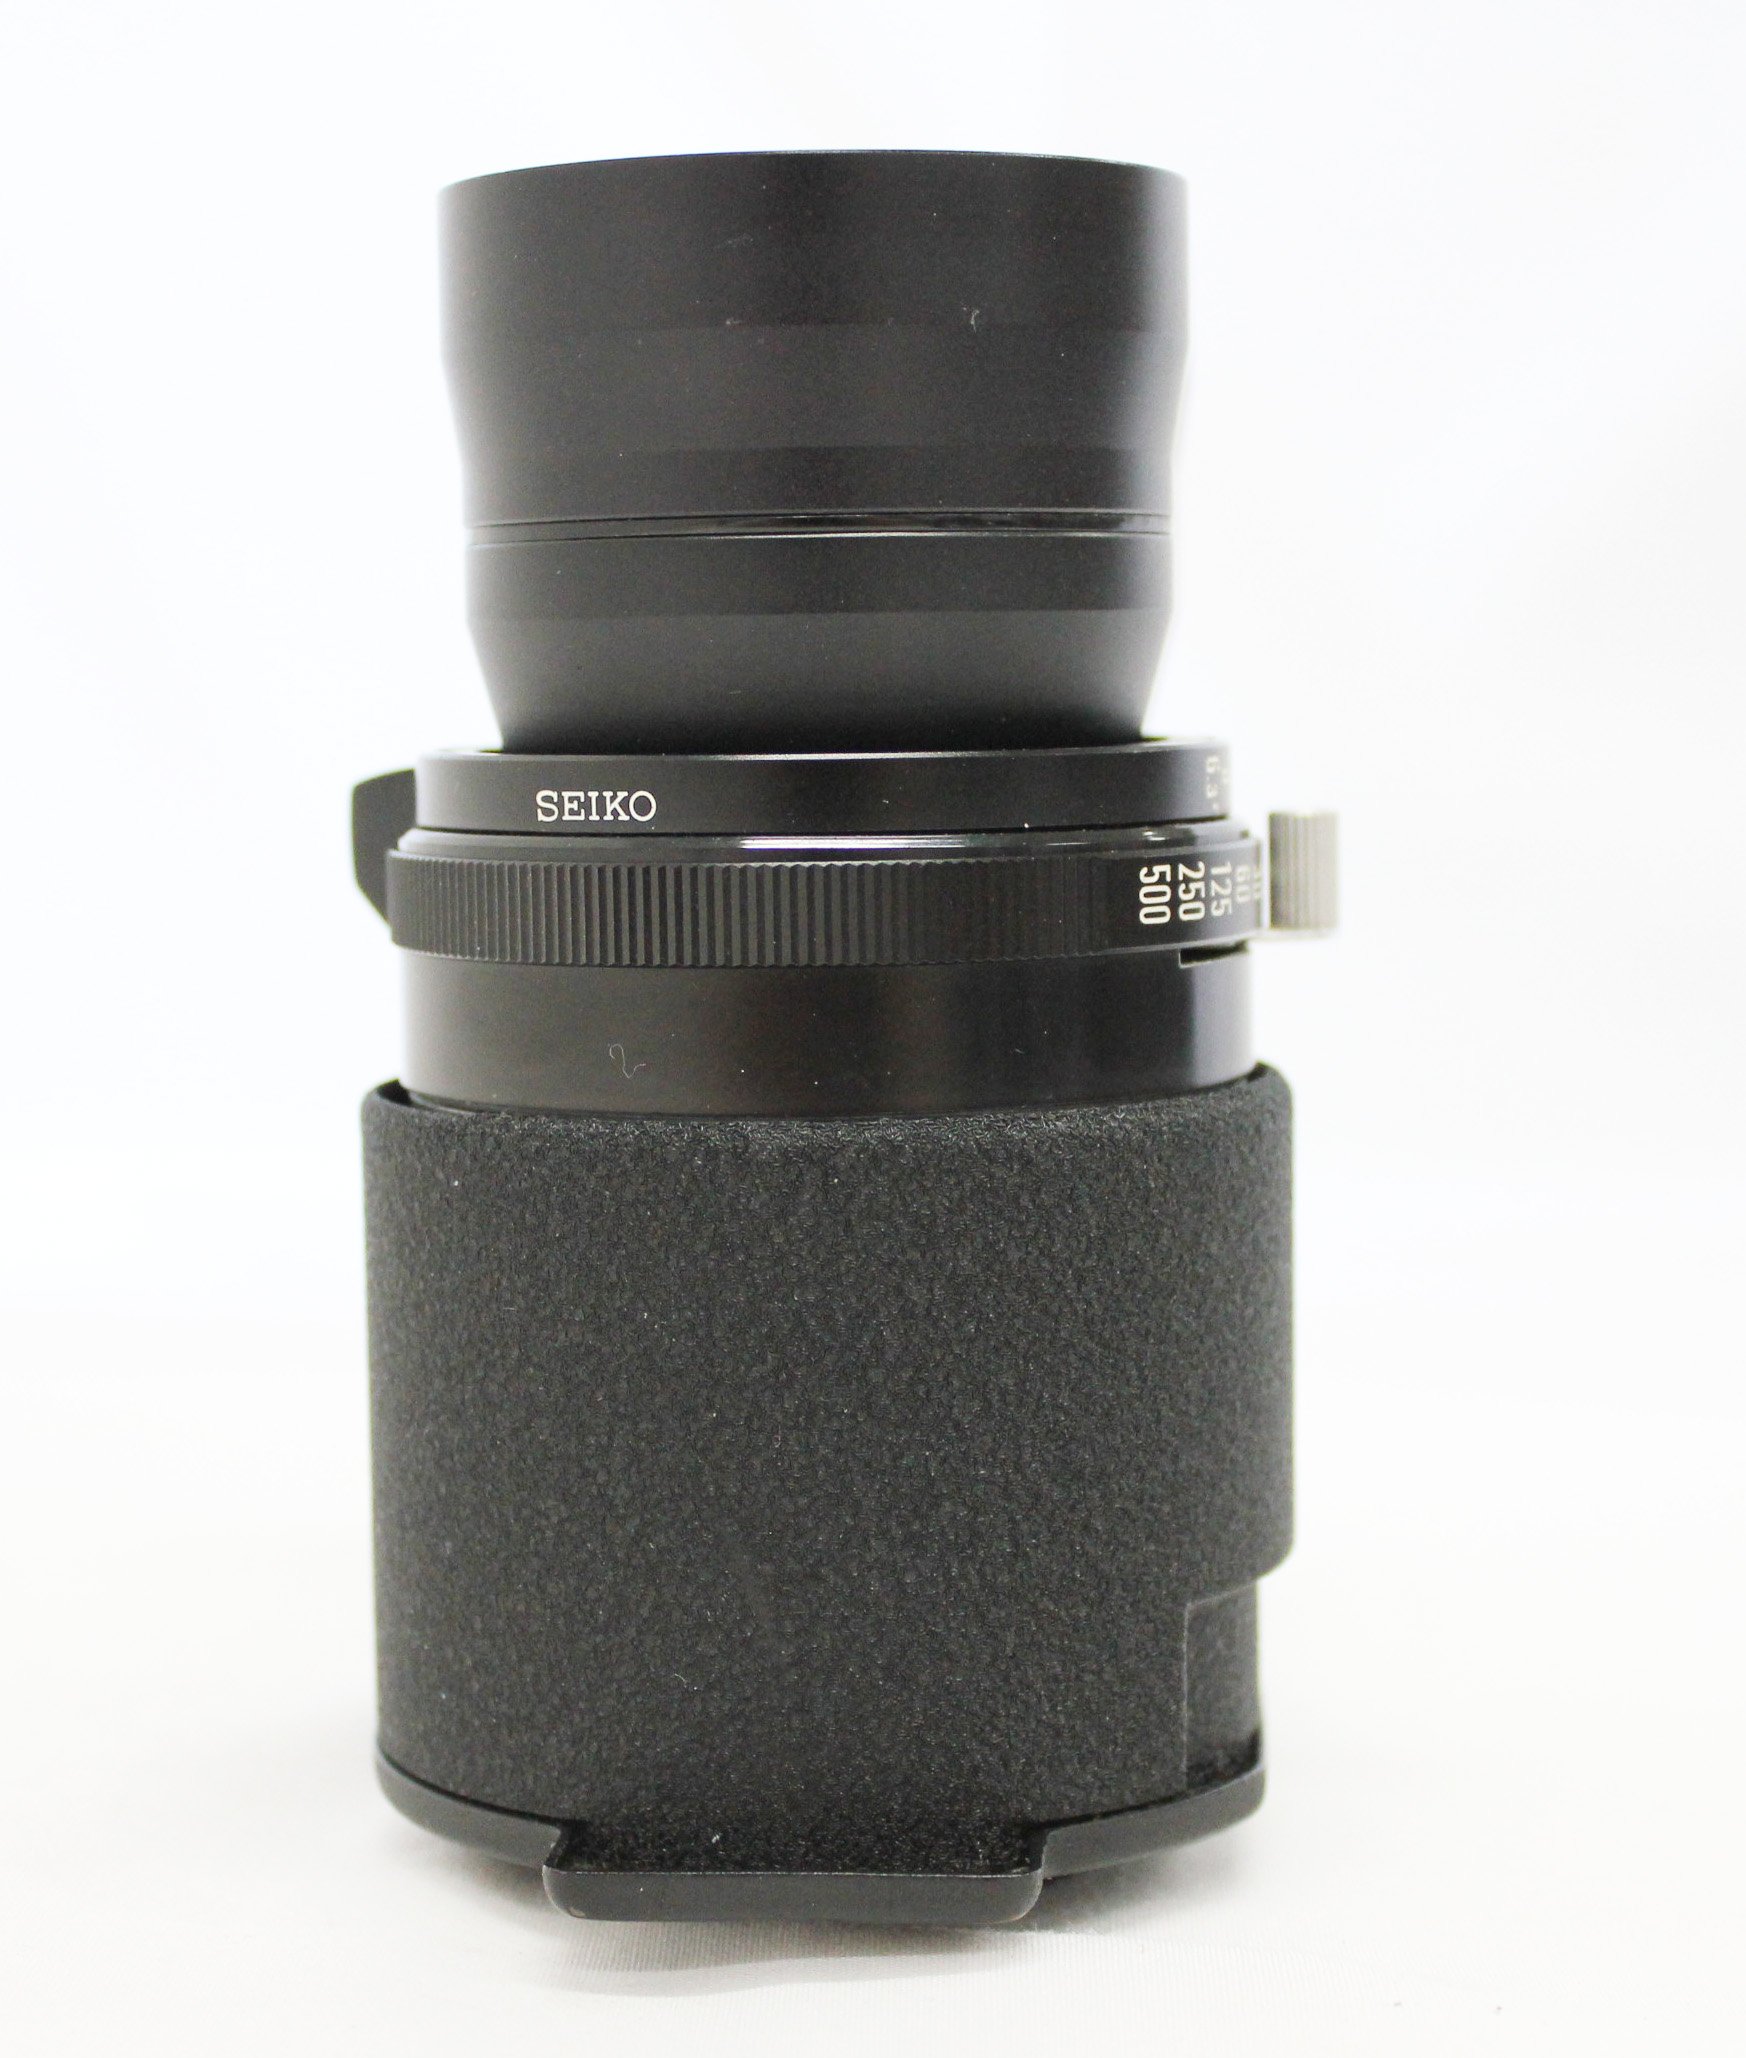  Mamiya Sekor 250mm F/6.3 TLR Lens for C3 C33 C220 C330 from Japan Photo 6